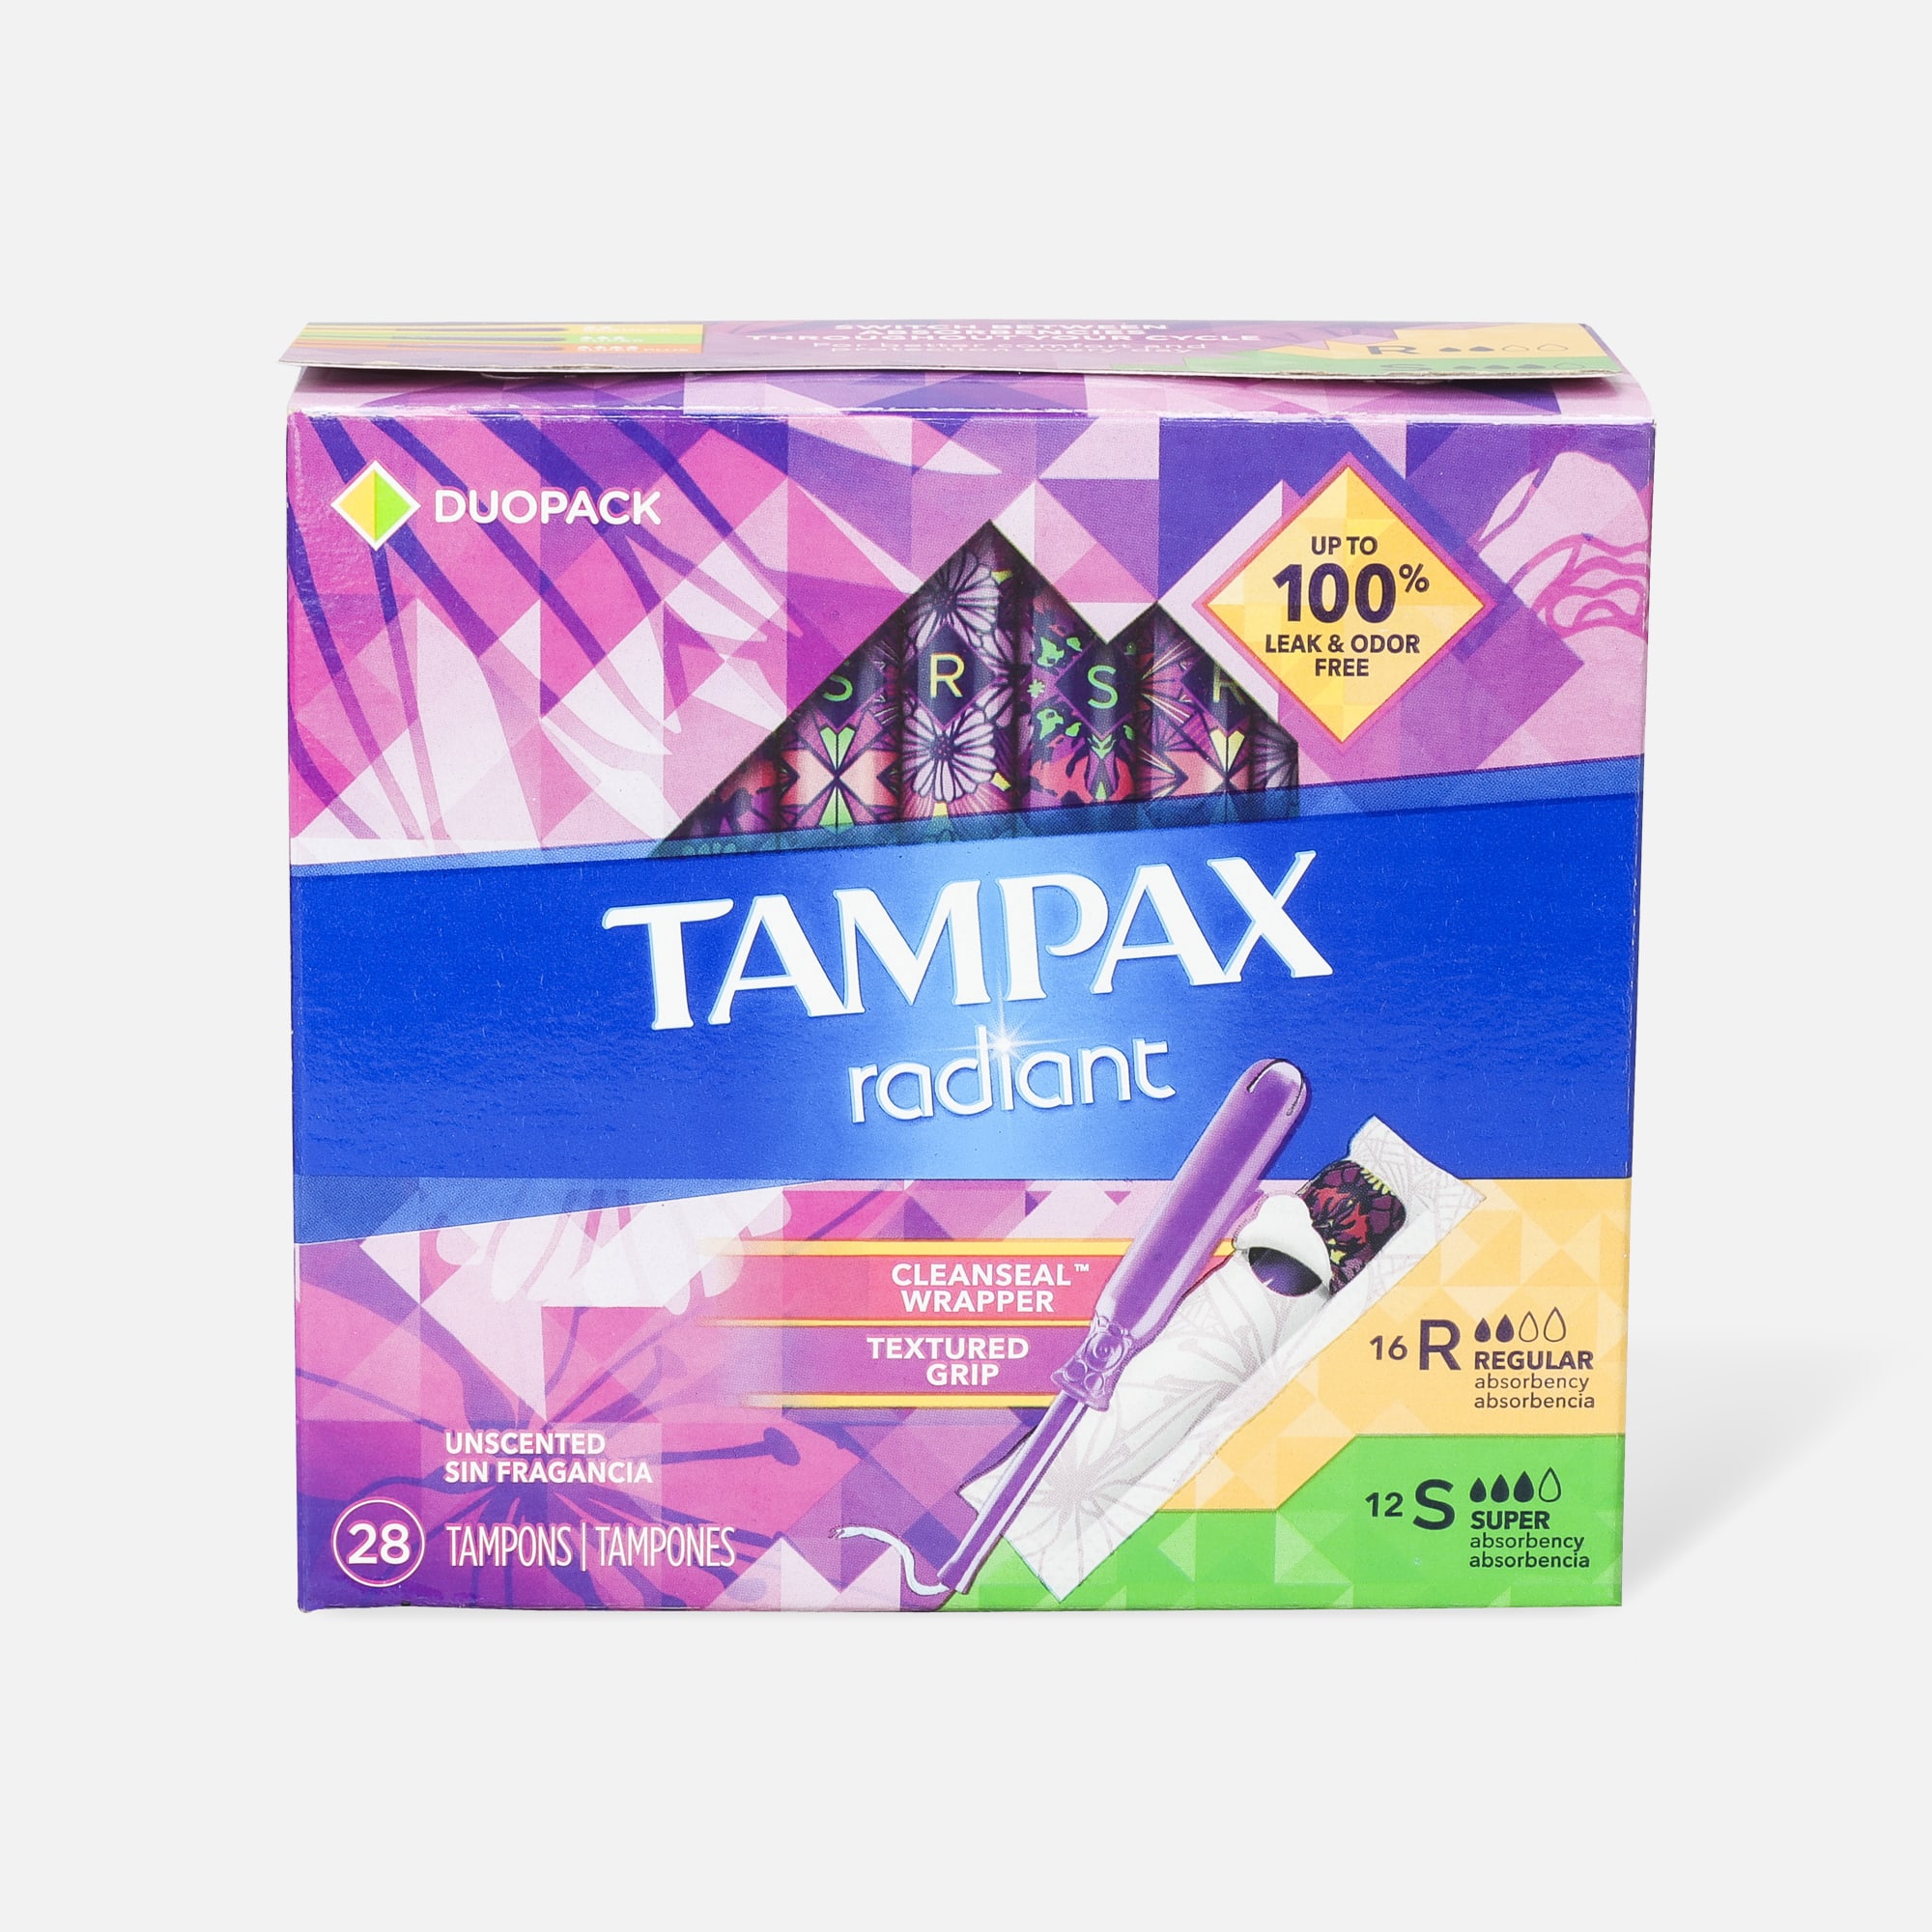 HSA Eligible  Tampax Radiant Tampons Duo Pack, Regular/Super